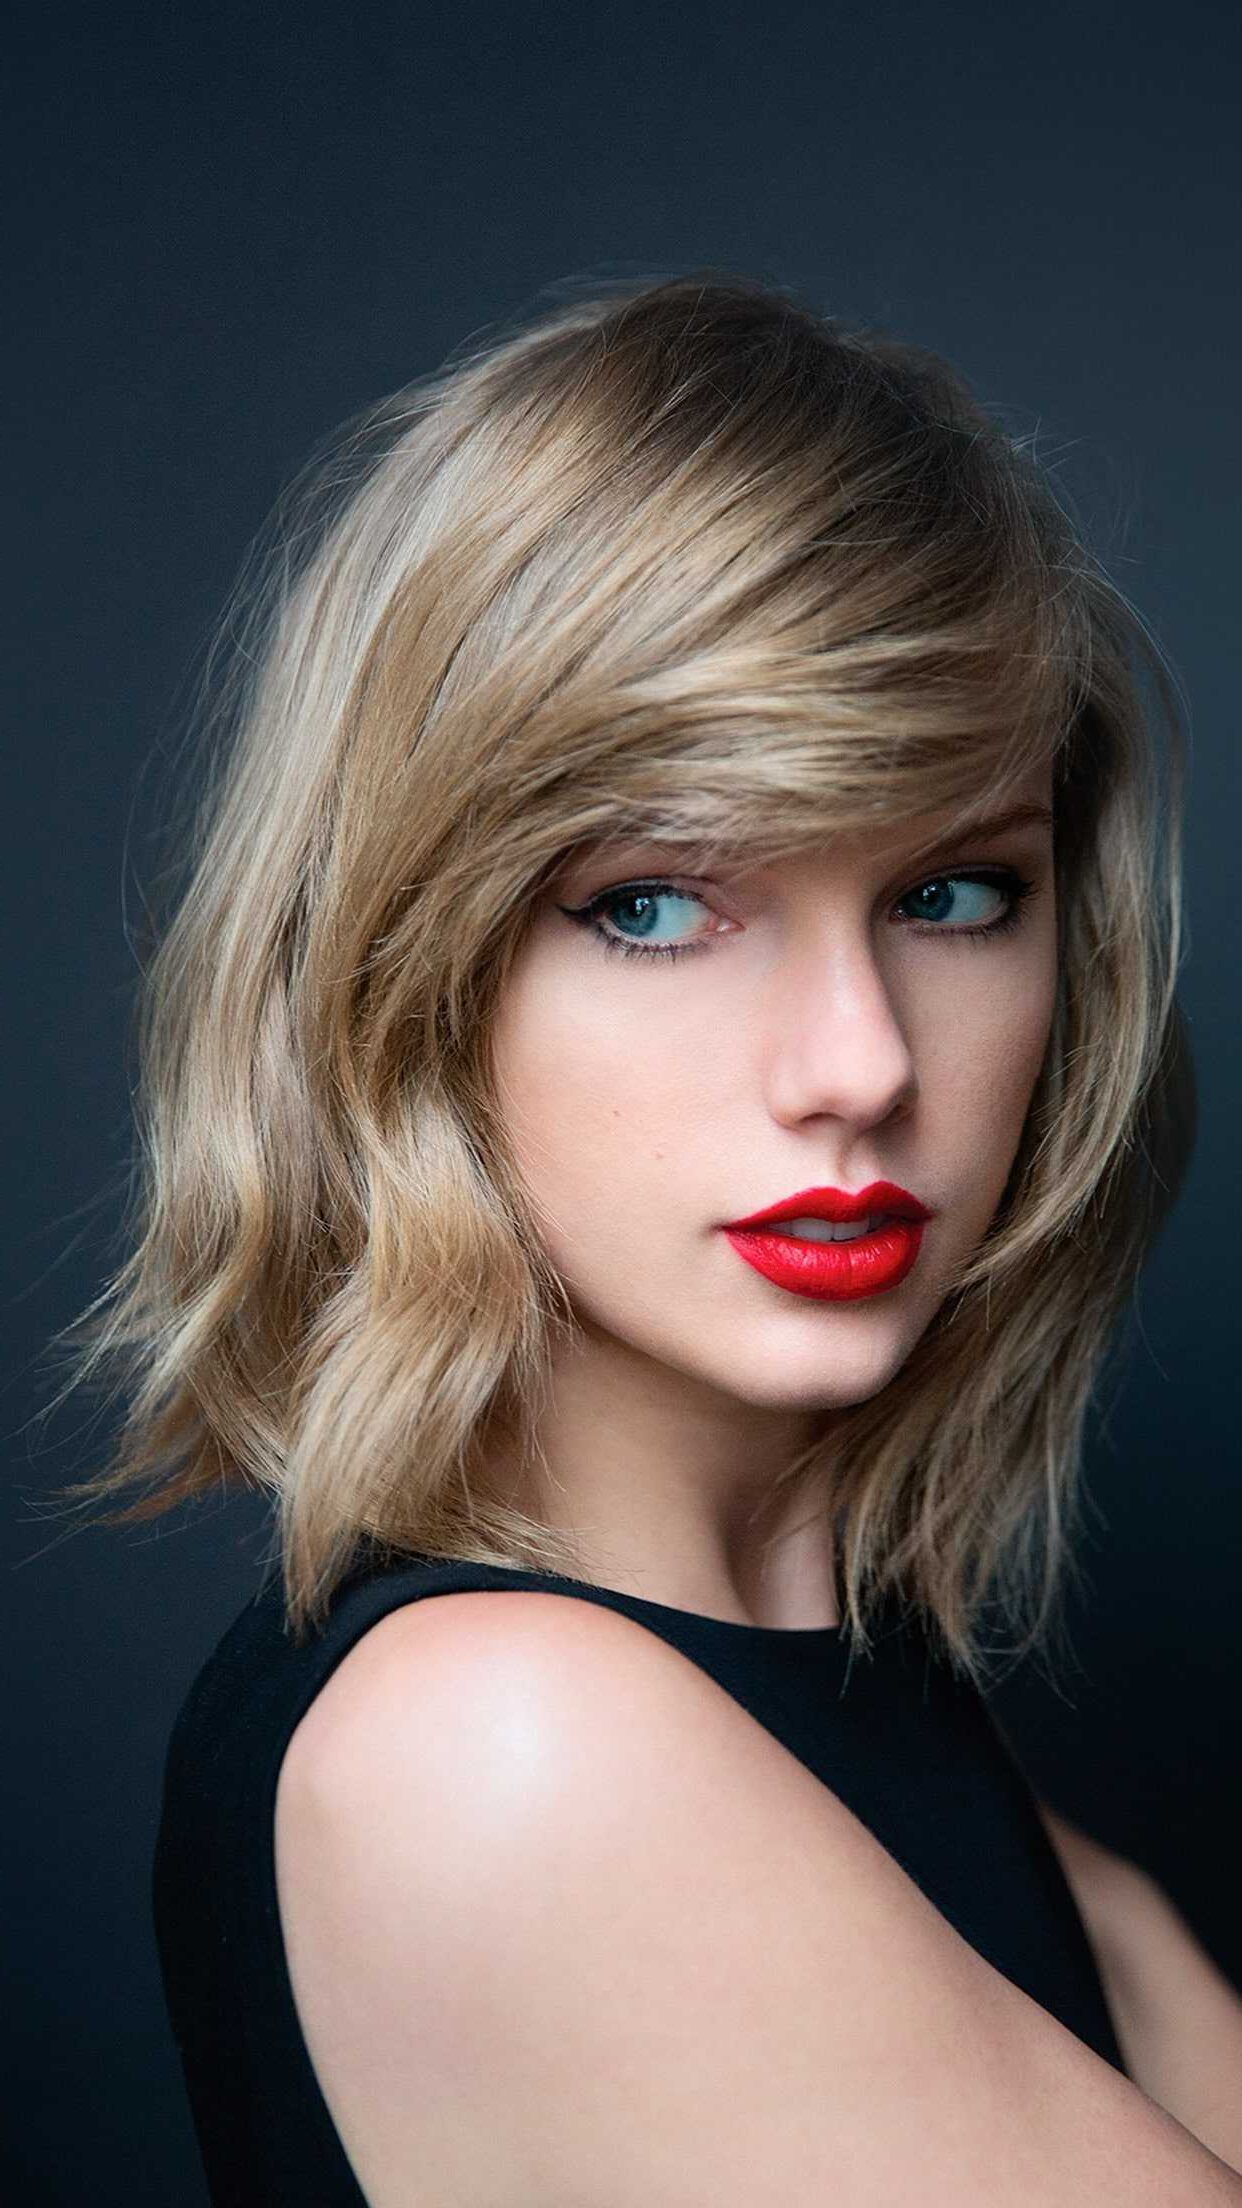 A woman with red lipstick and black dress - Taylor Swift